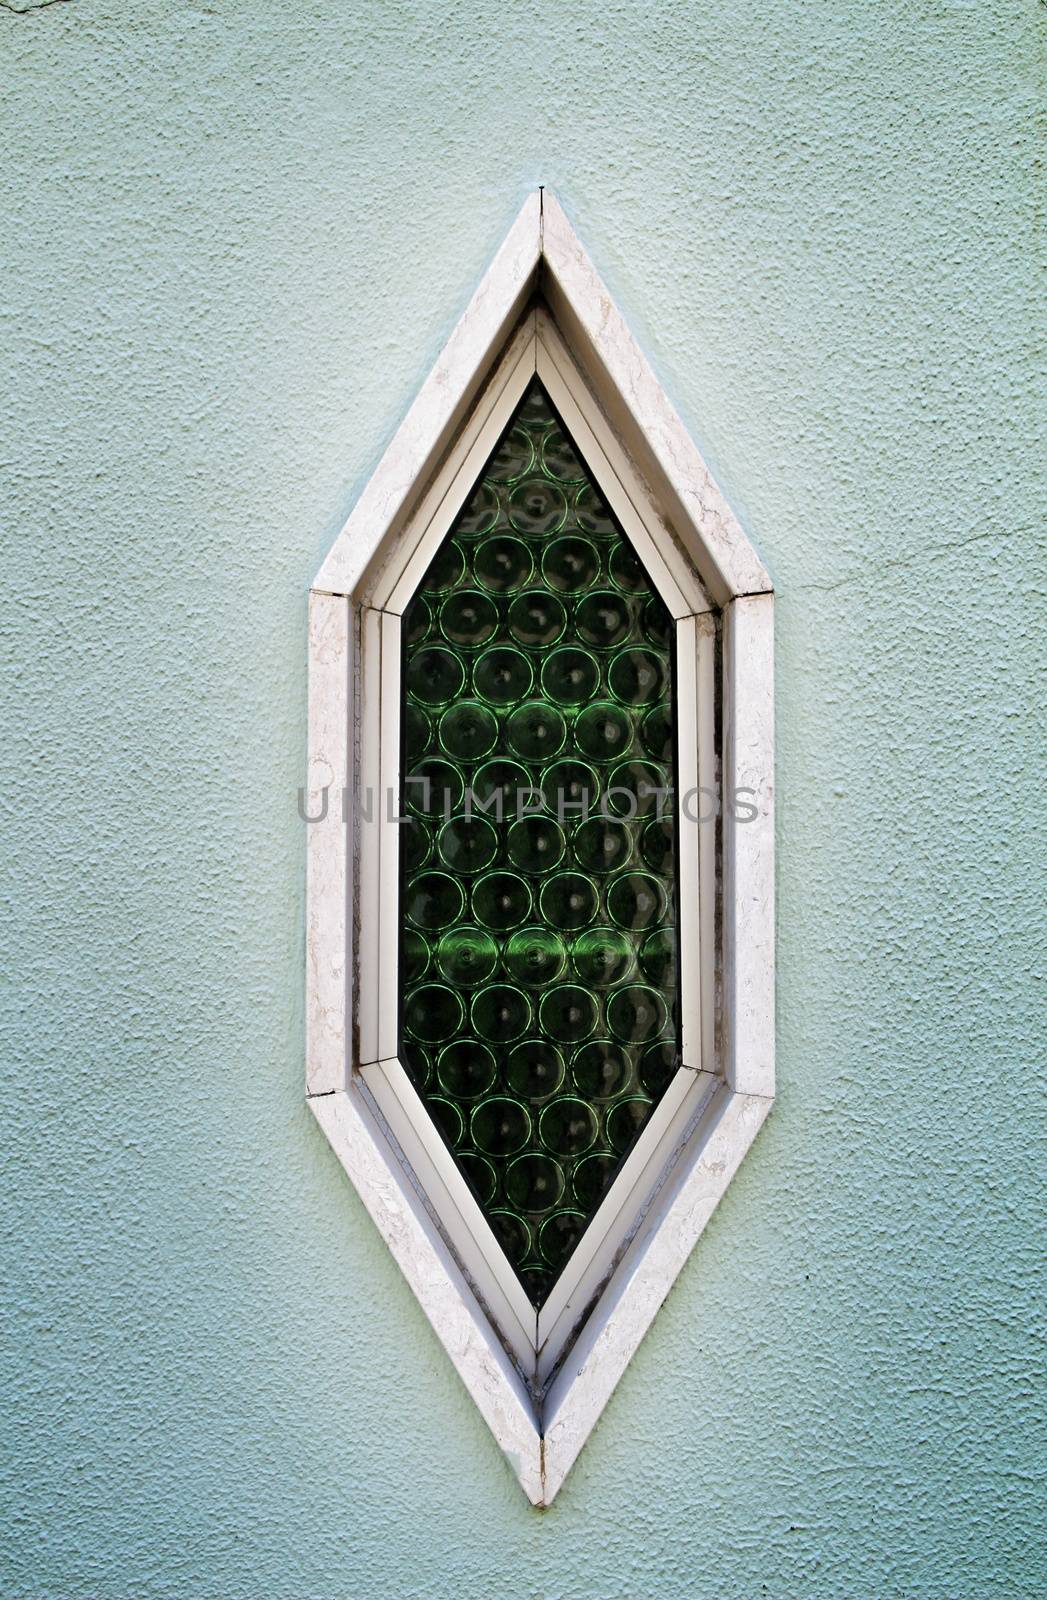 Beautiful Old and colorful wooden door with iron details and diamond shaped window in Lisbon, Portugal